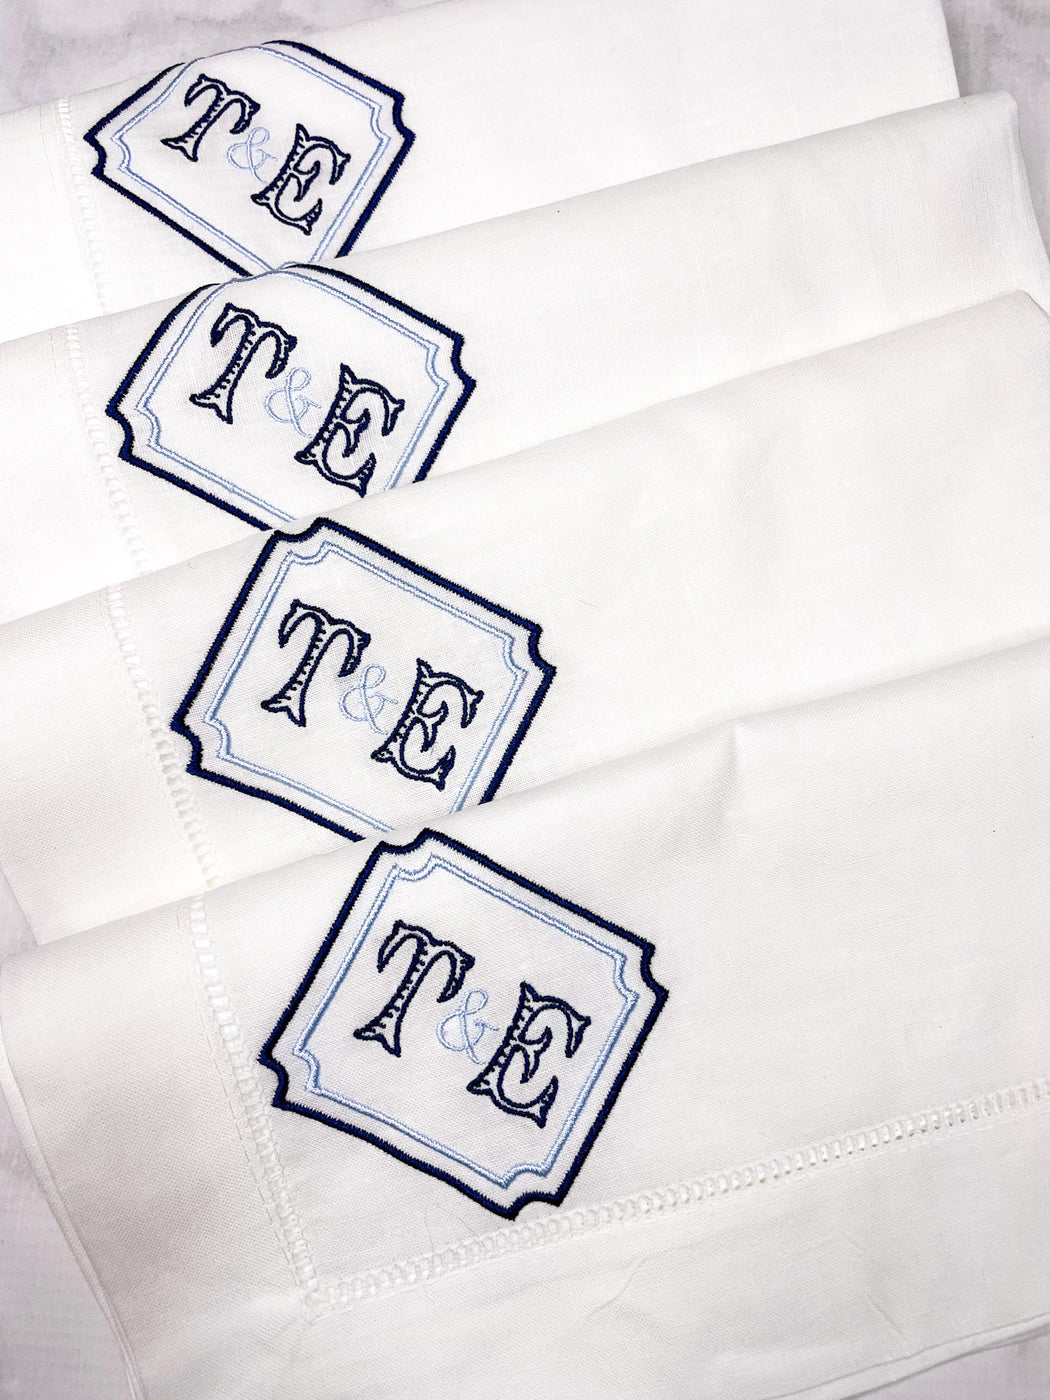 Linen/Cotton Blend Hemstitched Dinner Napkins - Couples two initials with frame